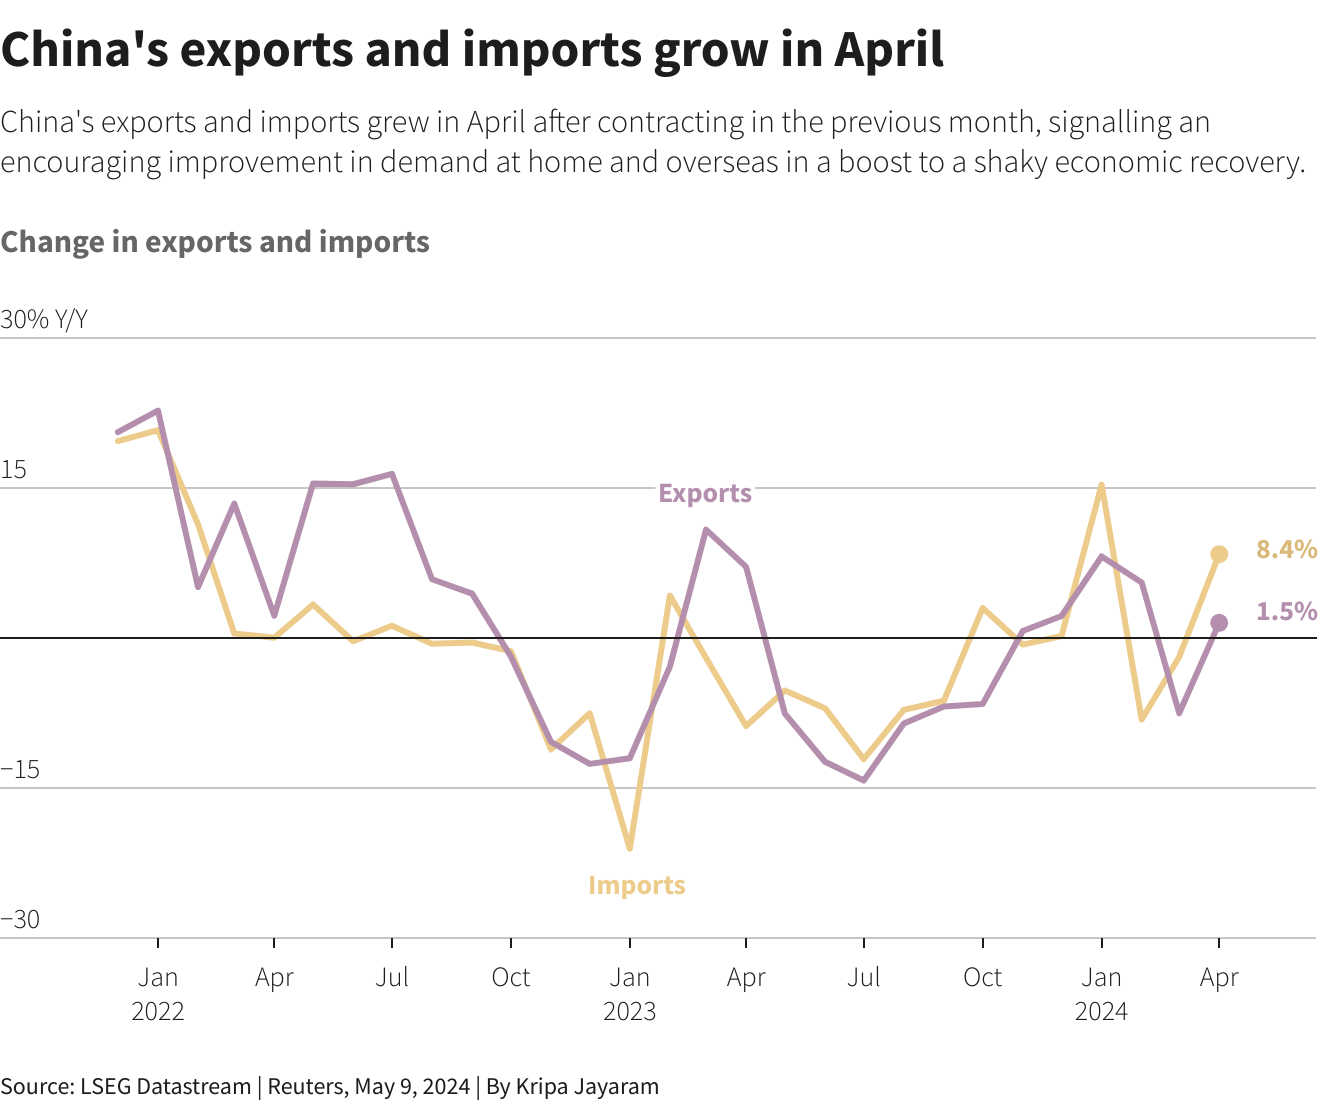 LSEG Datastream chart about China exports and imports growth in april 2024